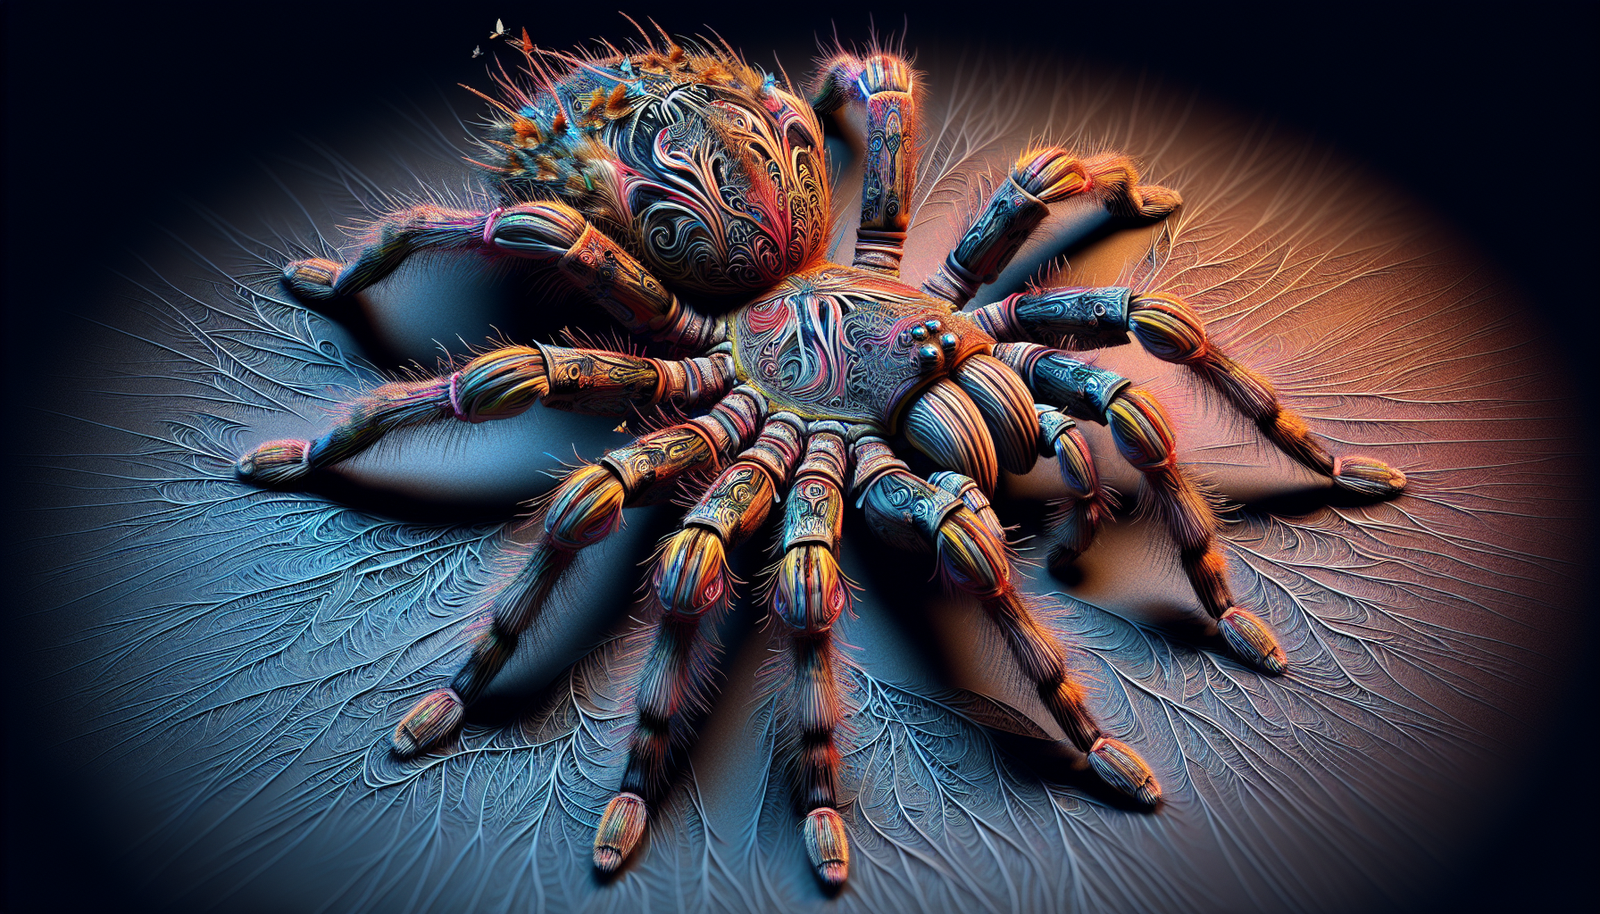 What Is The Role Of The Male Tarantula After Mating?